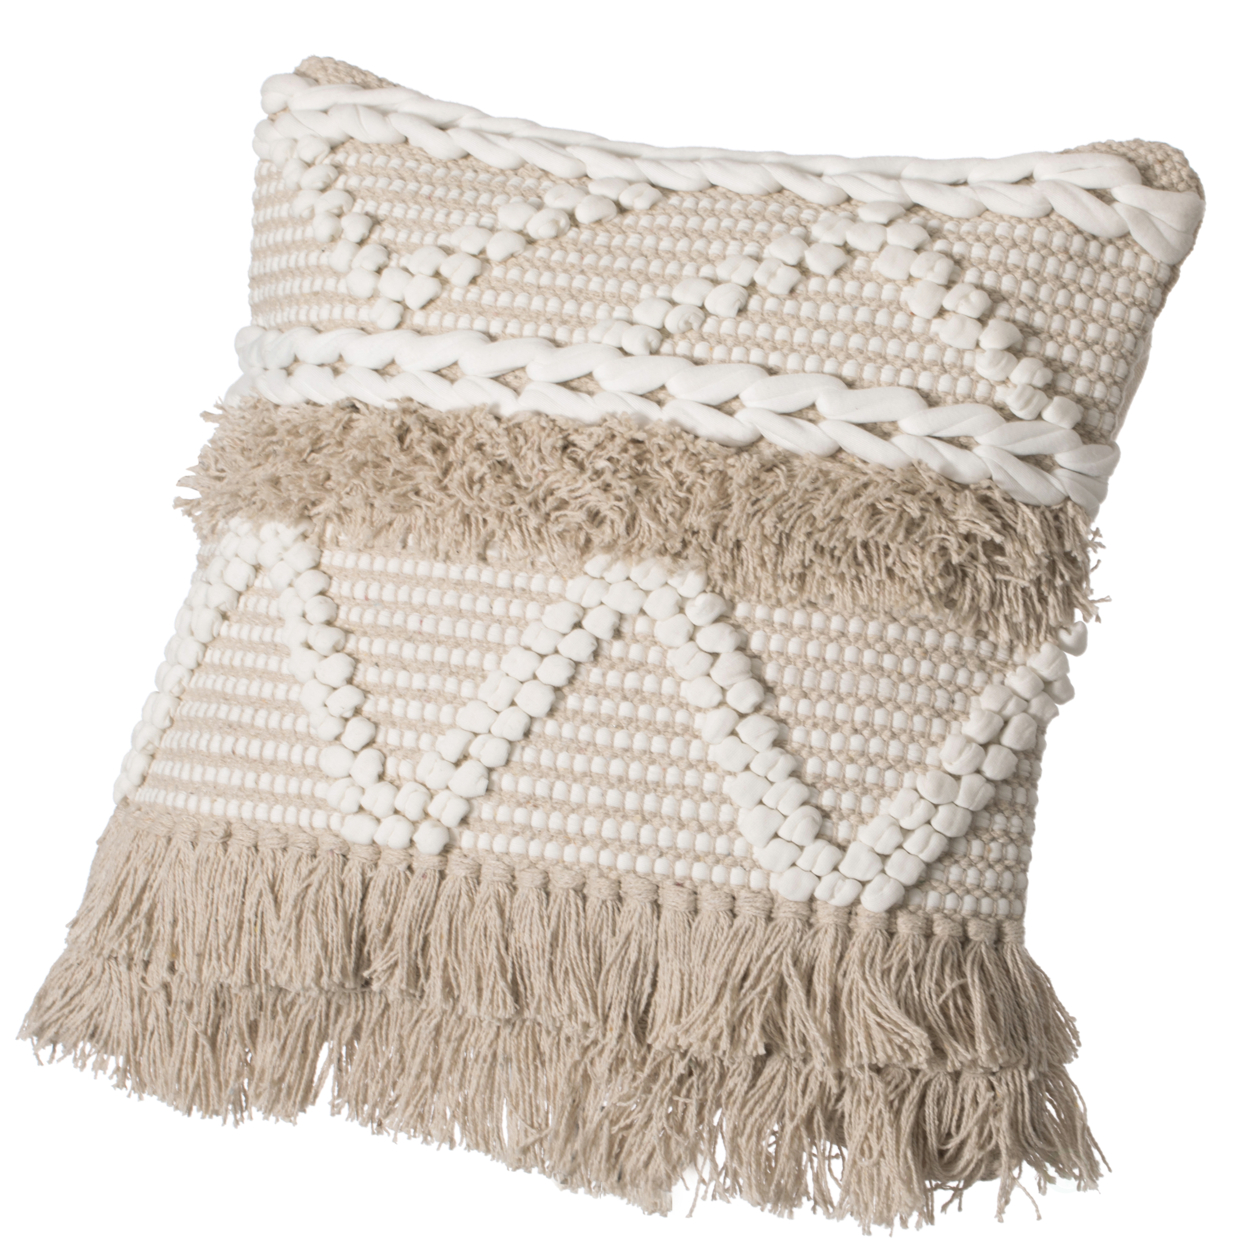 16 Handwoven Cotton Throw Pillow Cover With White Dot Pattern And Natural Tassel Fringe Lines - Pillowcase Only